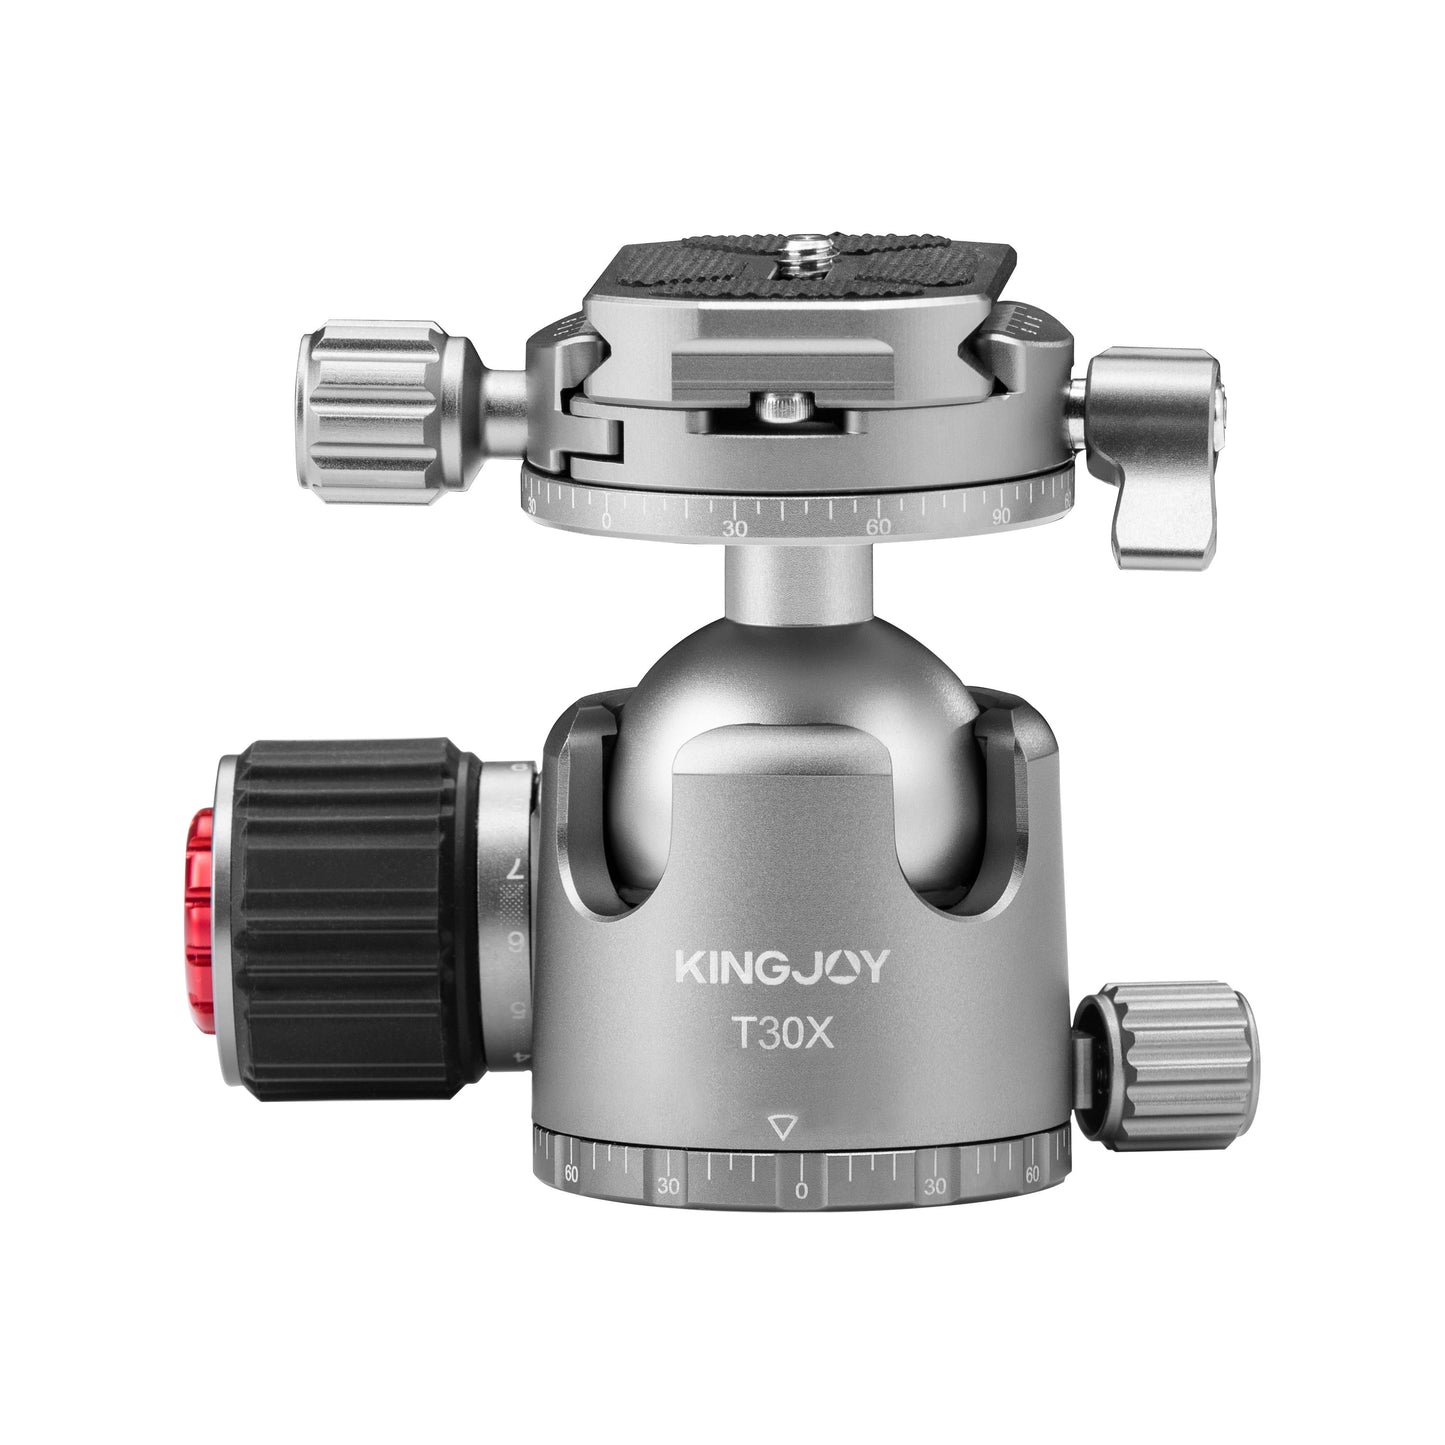 Kingjoy T30X professional double panoramic low center of gravity aluminum alloy camera ball head, 1lb, ball dia 1.73in, base dia 2.2in